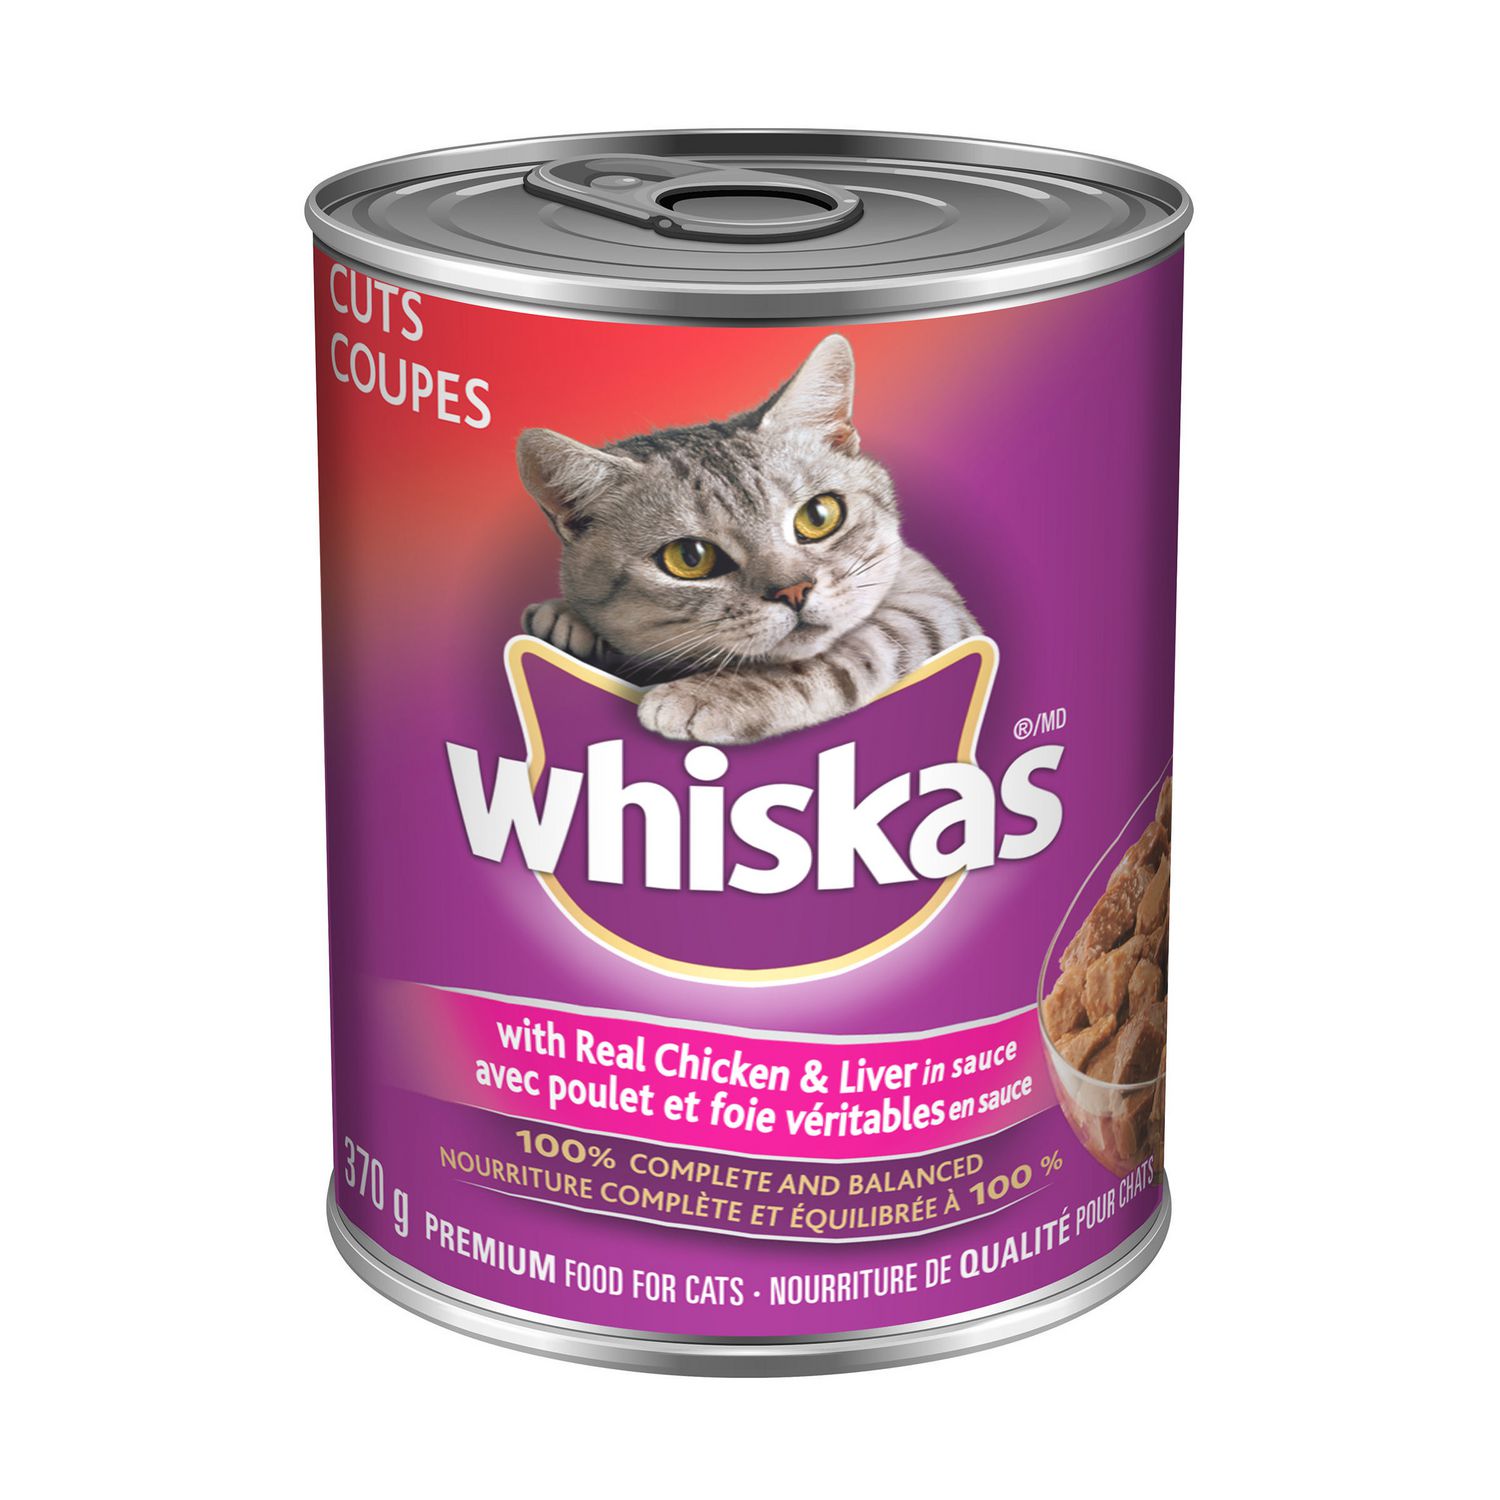 Reaction To Opening A Can Of Whiskas